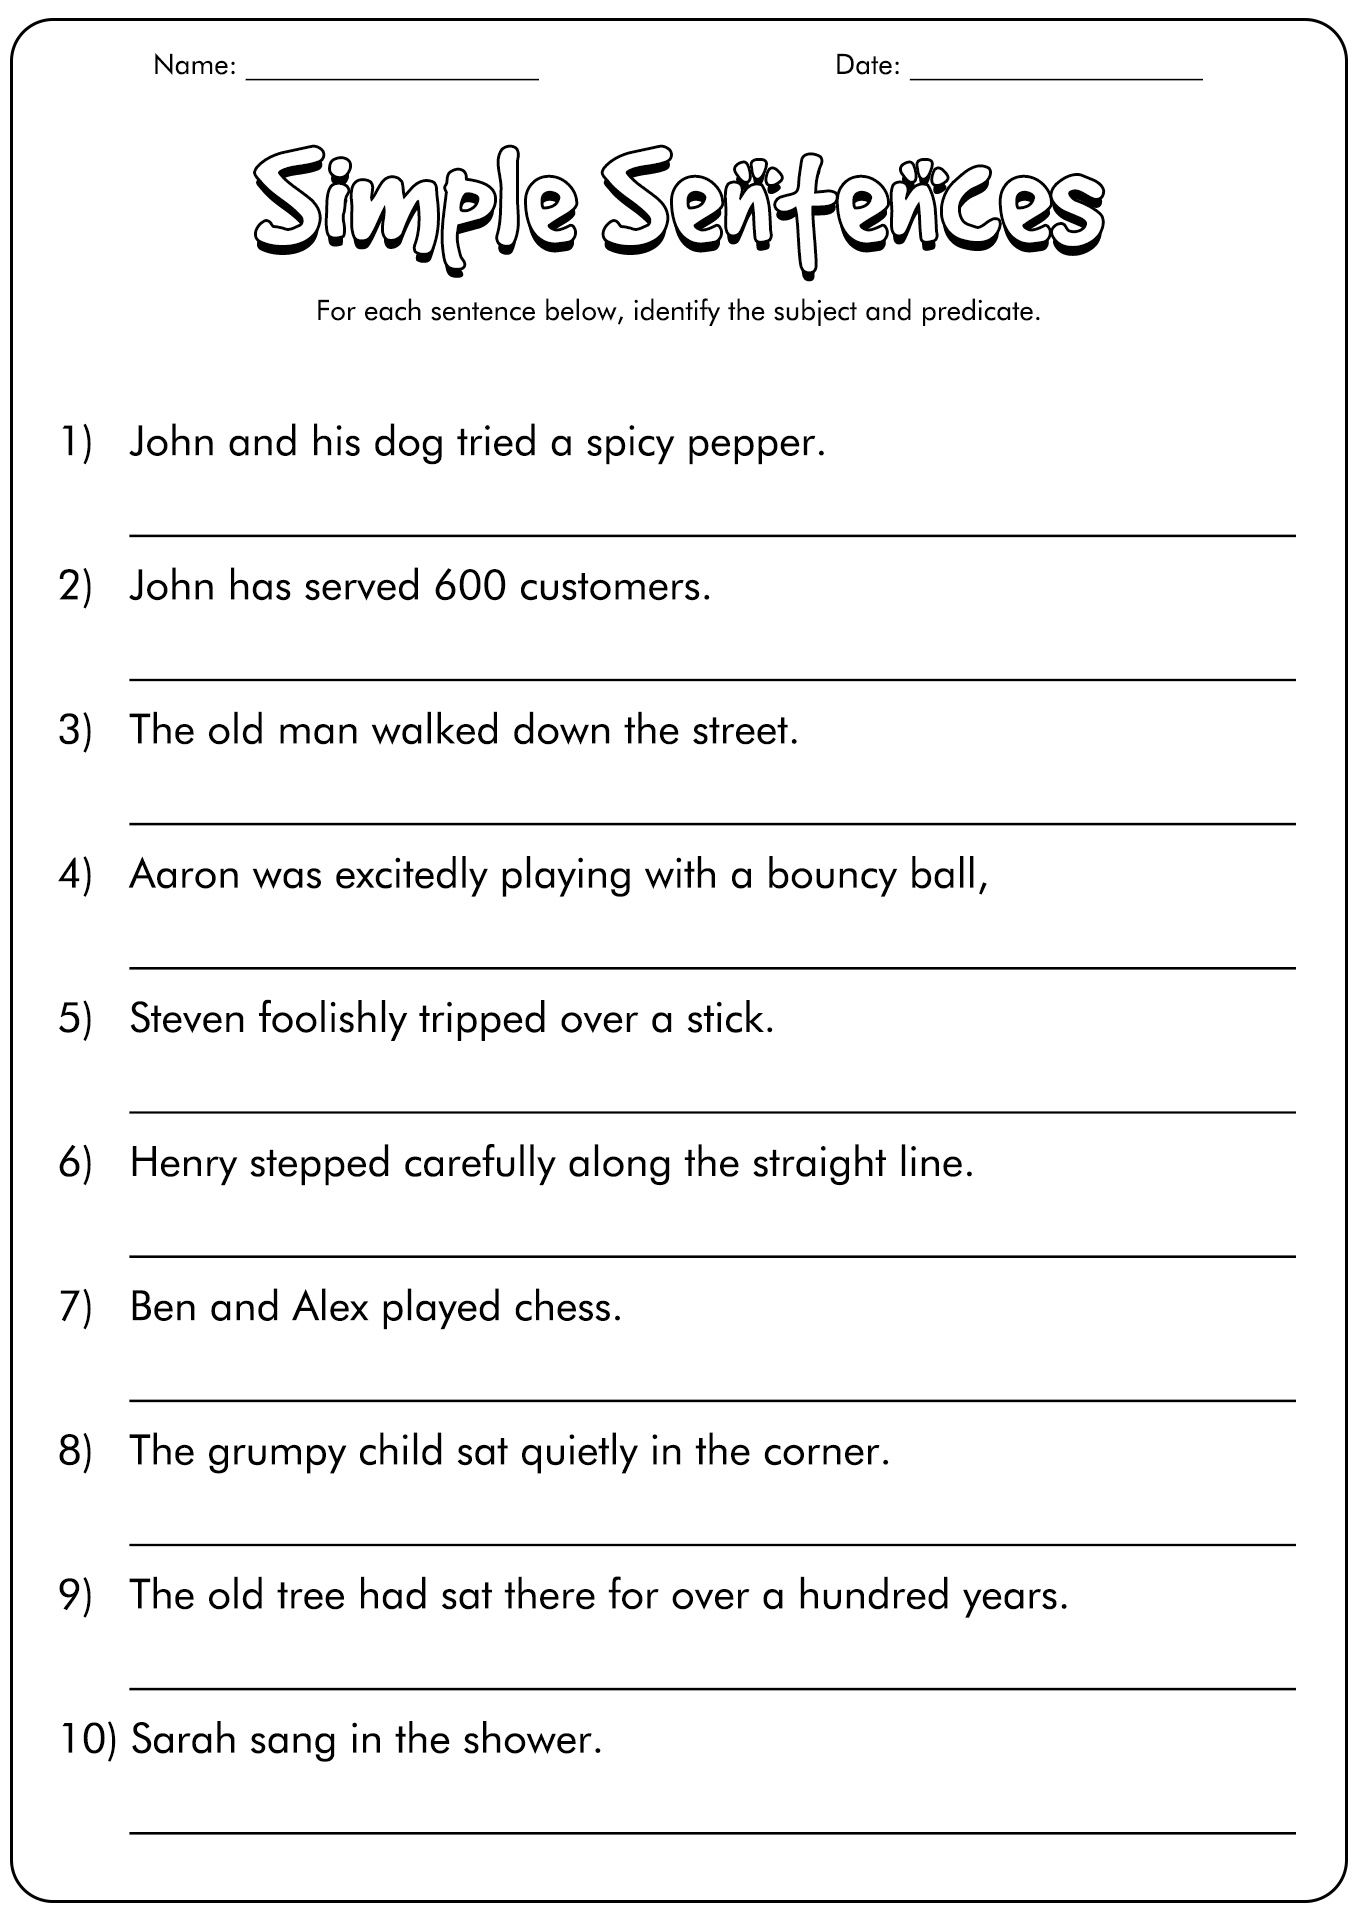 16-best-images-of-simple-sentences-for-kindergarten-worksheet-kindergarten-sentence-worksheets